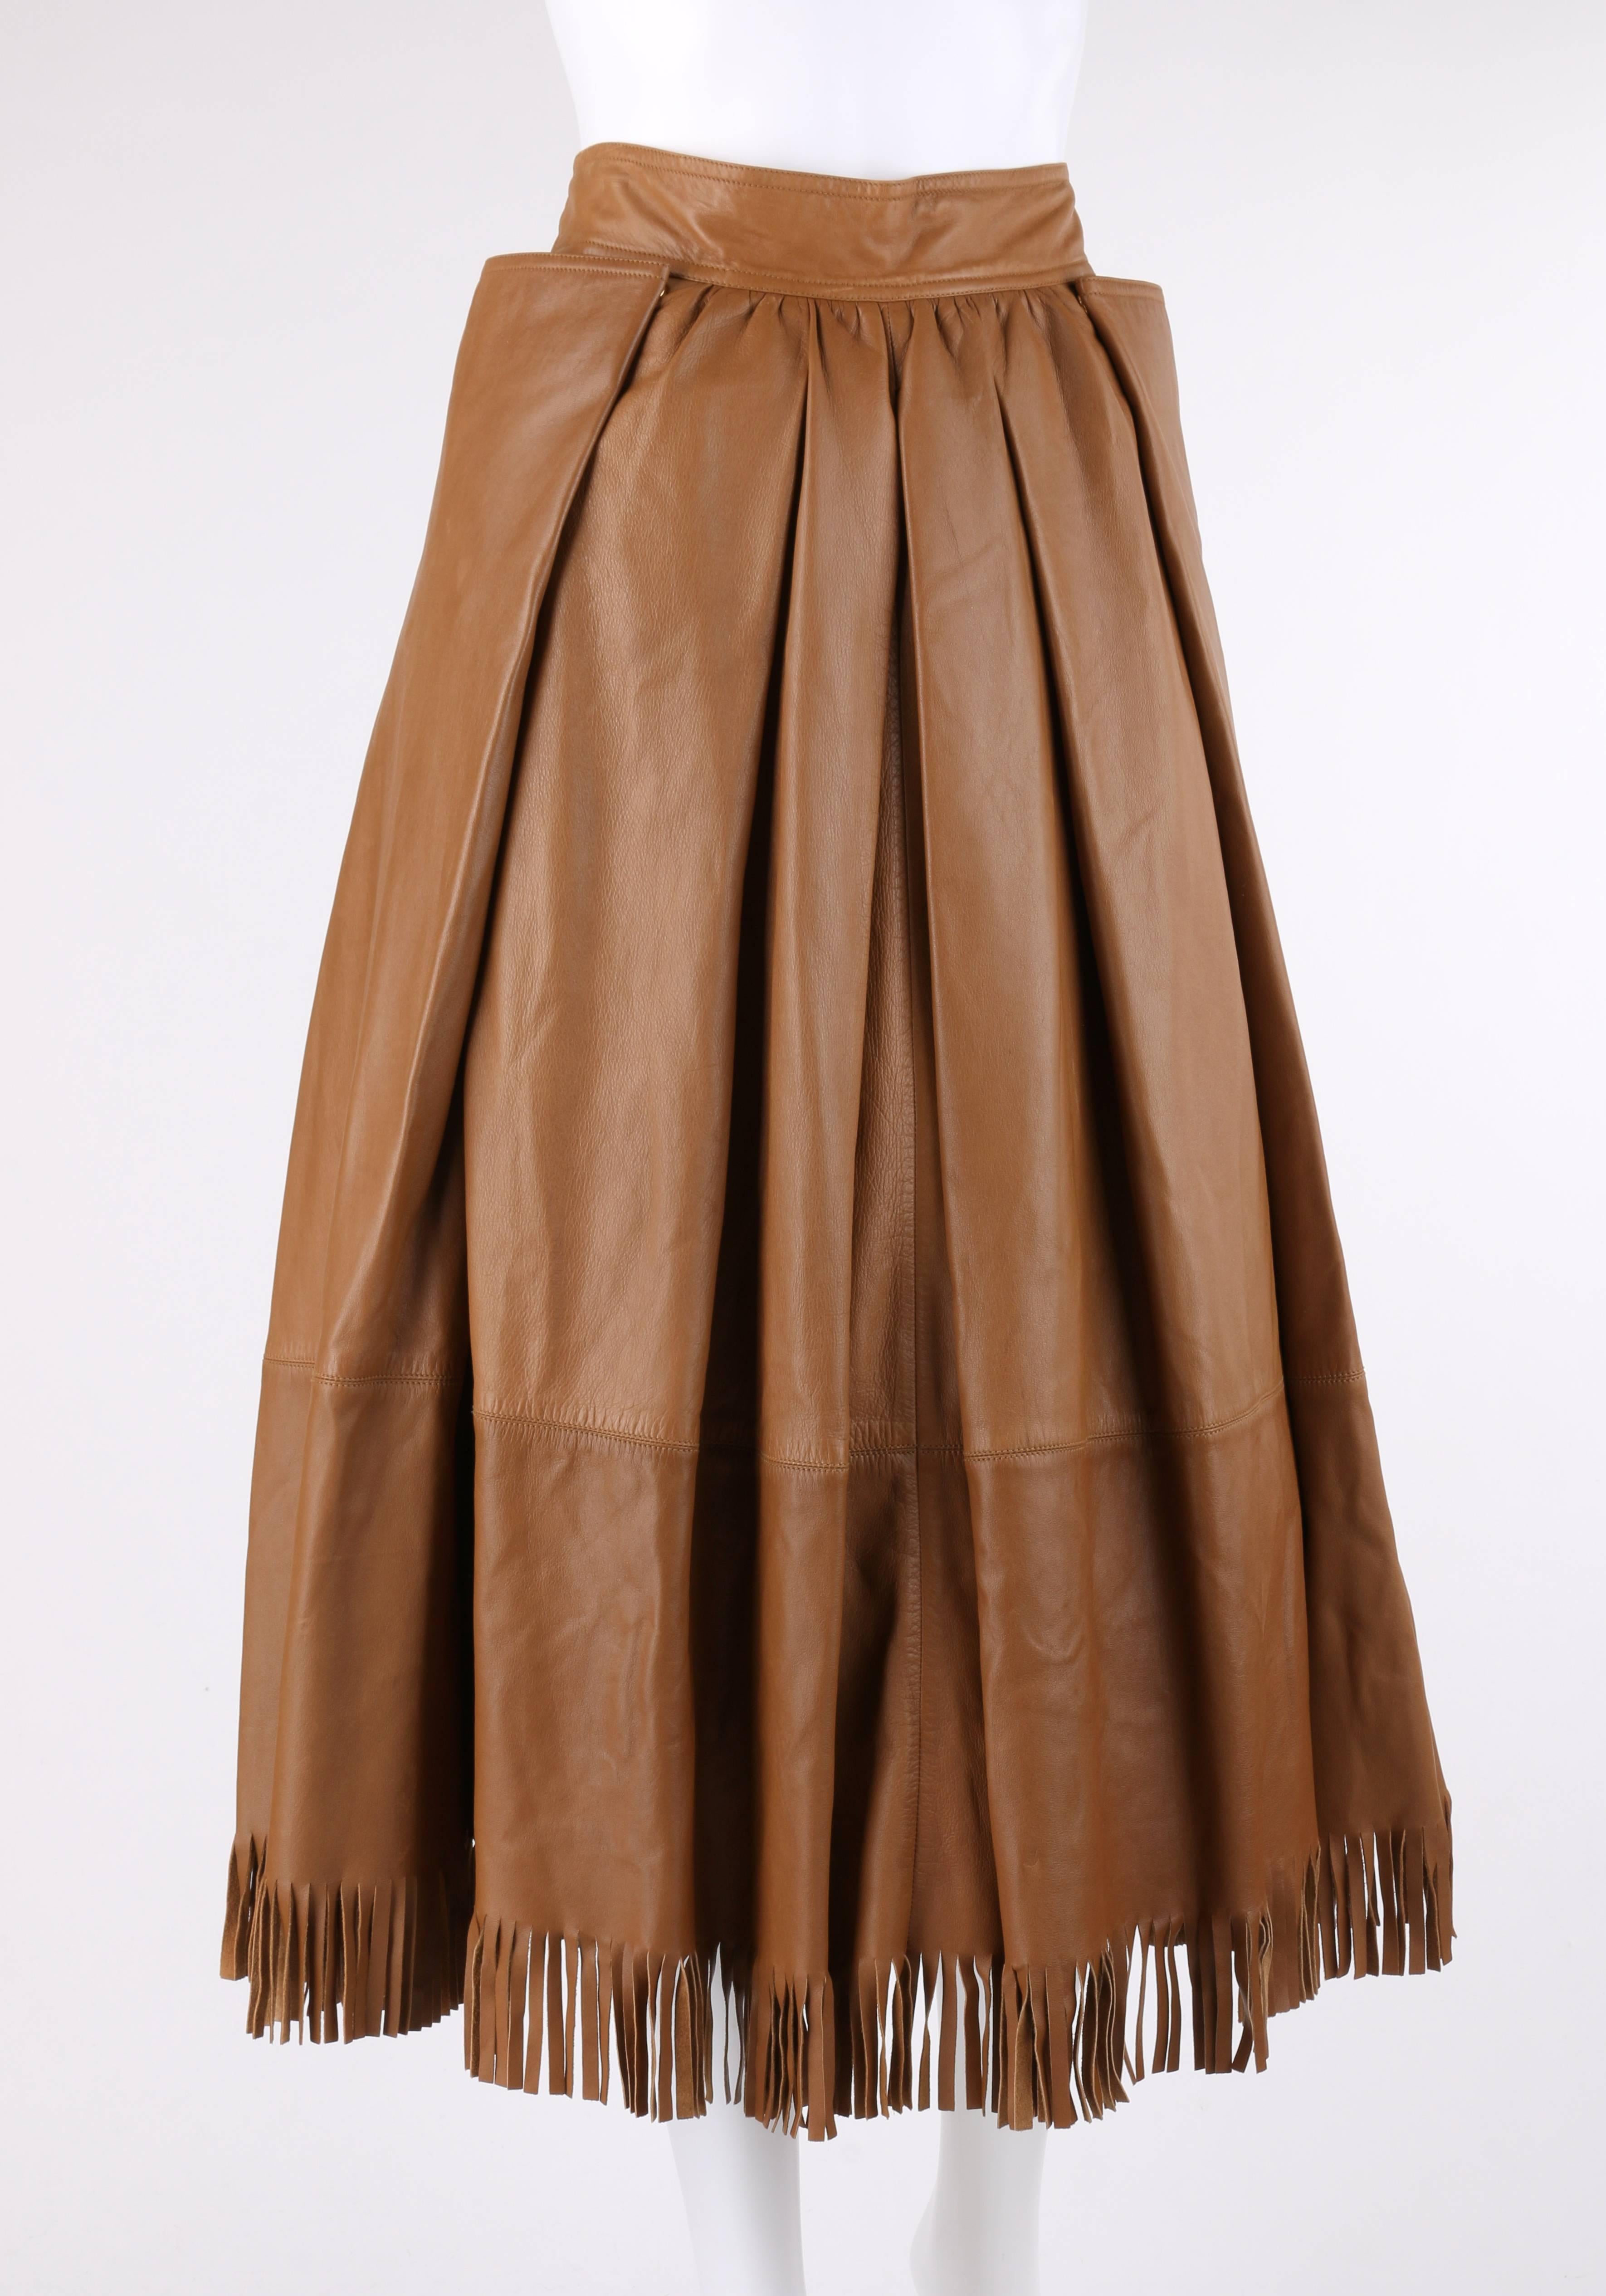 Vintage Gucci c.1970's tan brown leather pleated tea length skirt. Thin banded waist. Four front and back knife pleats. Lightly gathered waist. Pleated side seam panels with single snap closure at front and back and pocket. Gold-toned signature 